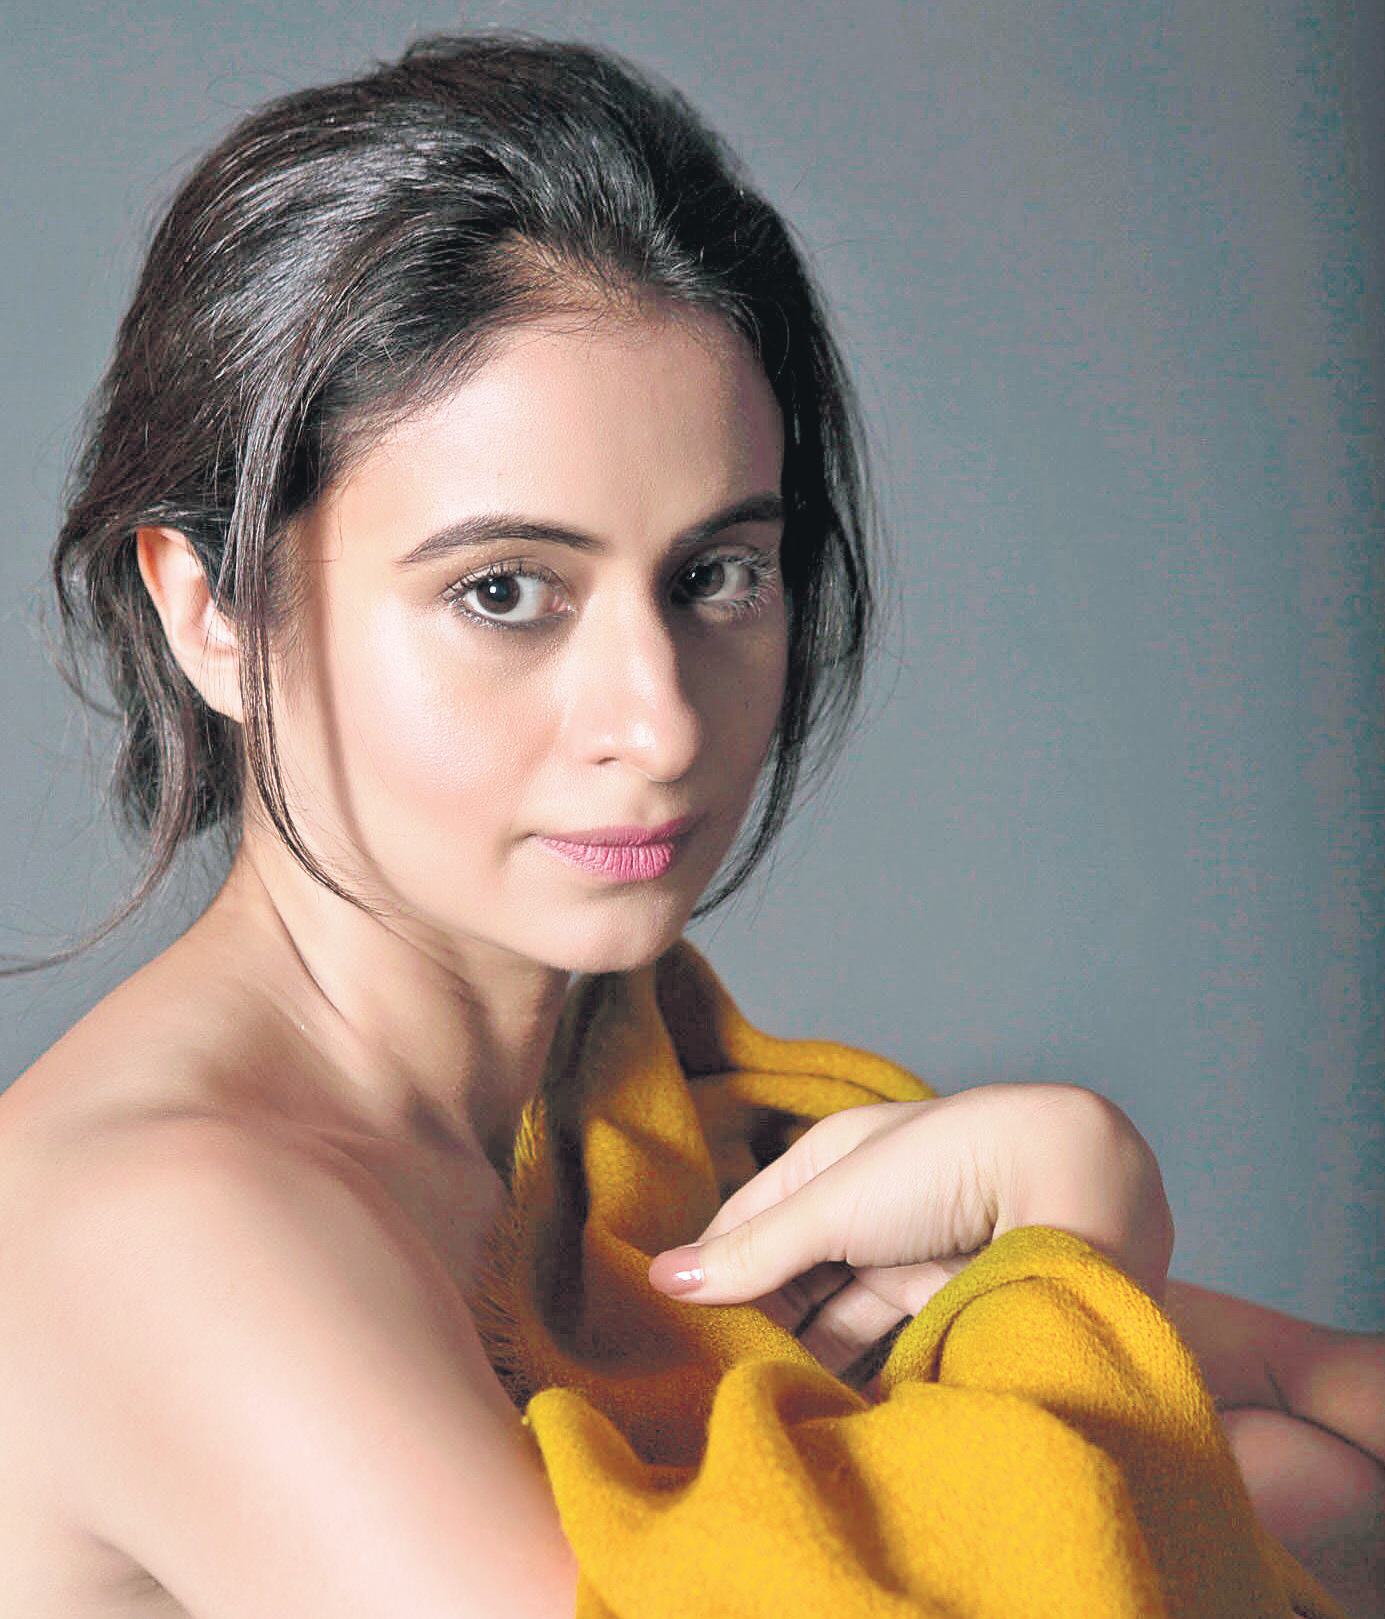 Manto was not the womaniser I thought he was: Rasika Dugal.